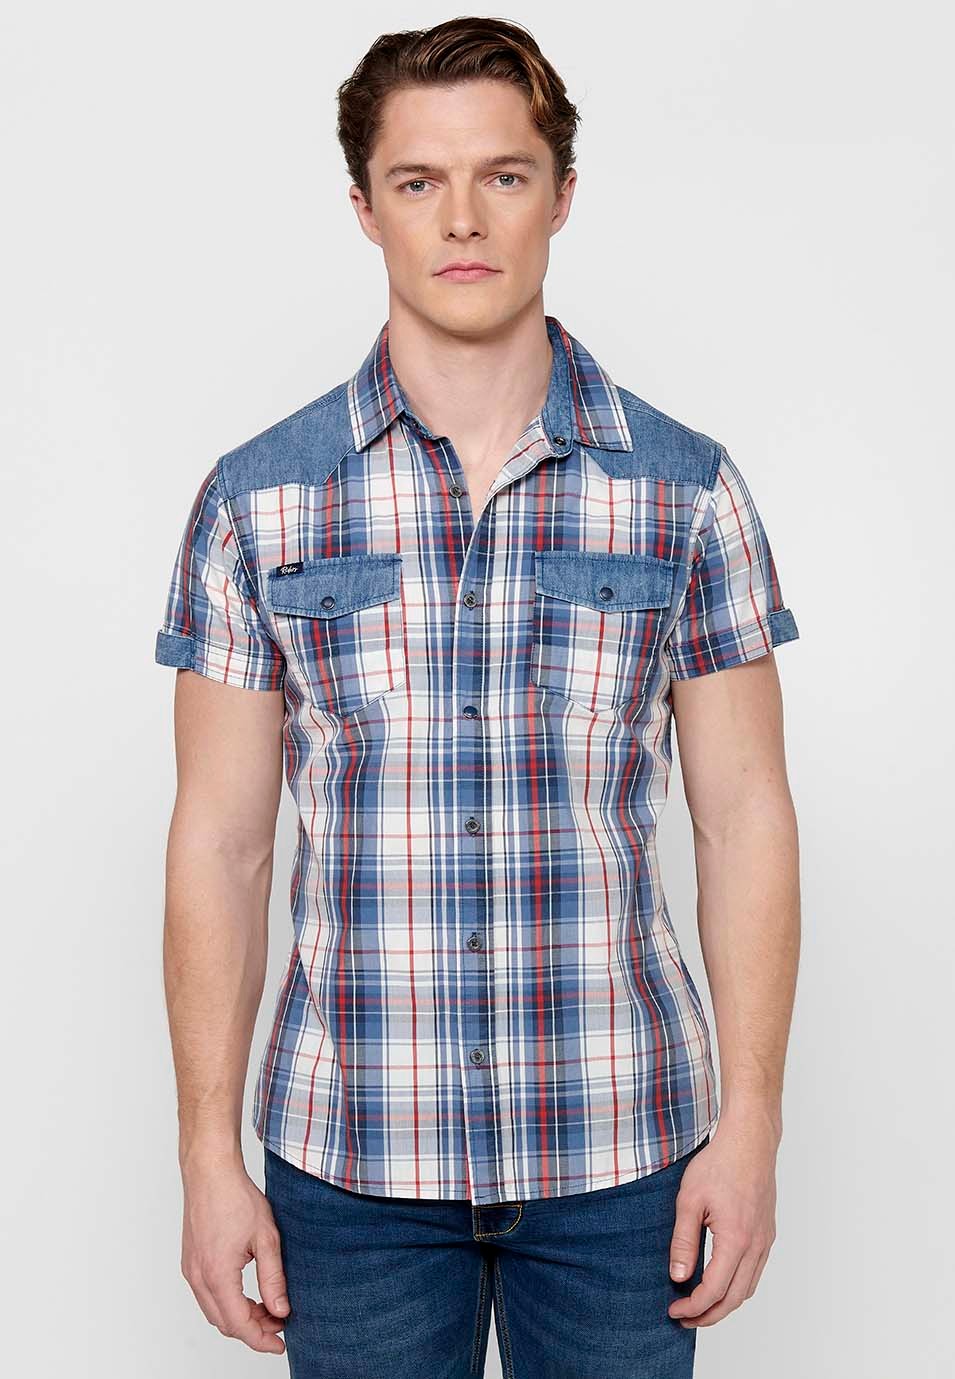 Short-sleeved cotton shirt with turn-up finish with button front closure and front pockets with flaps with a blue checkered print for men 2